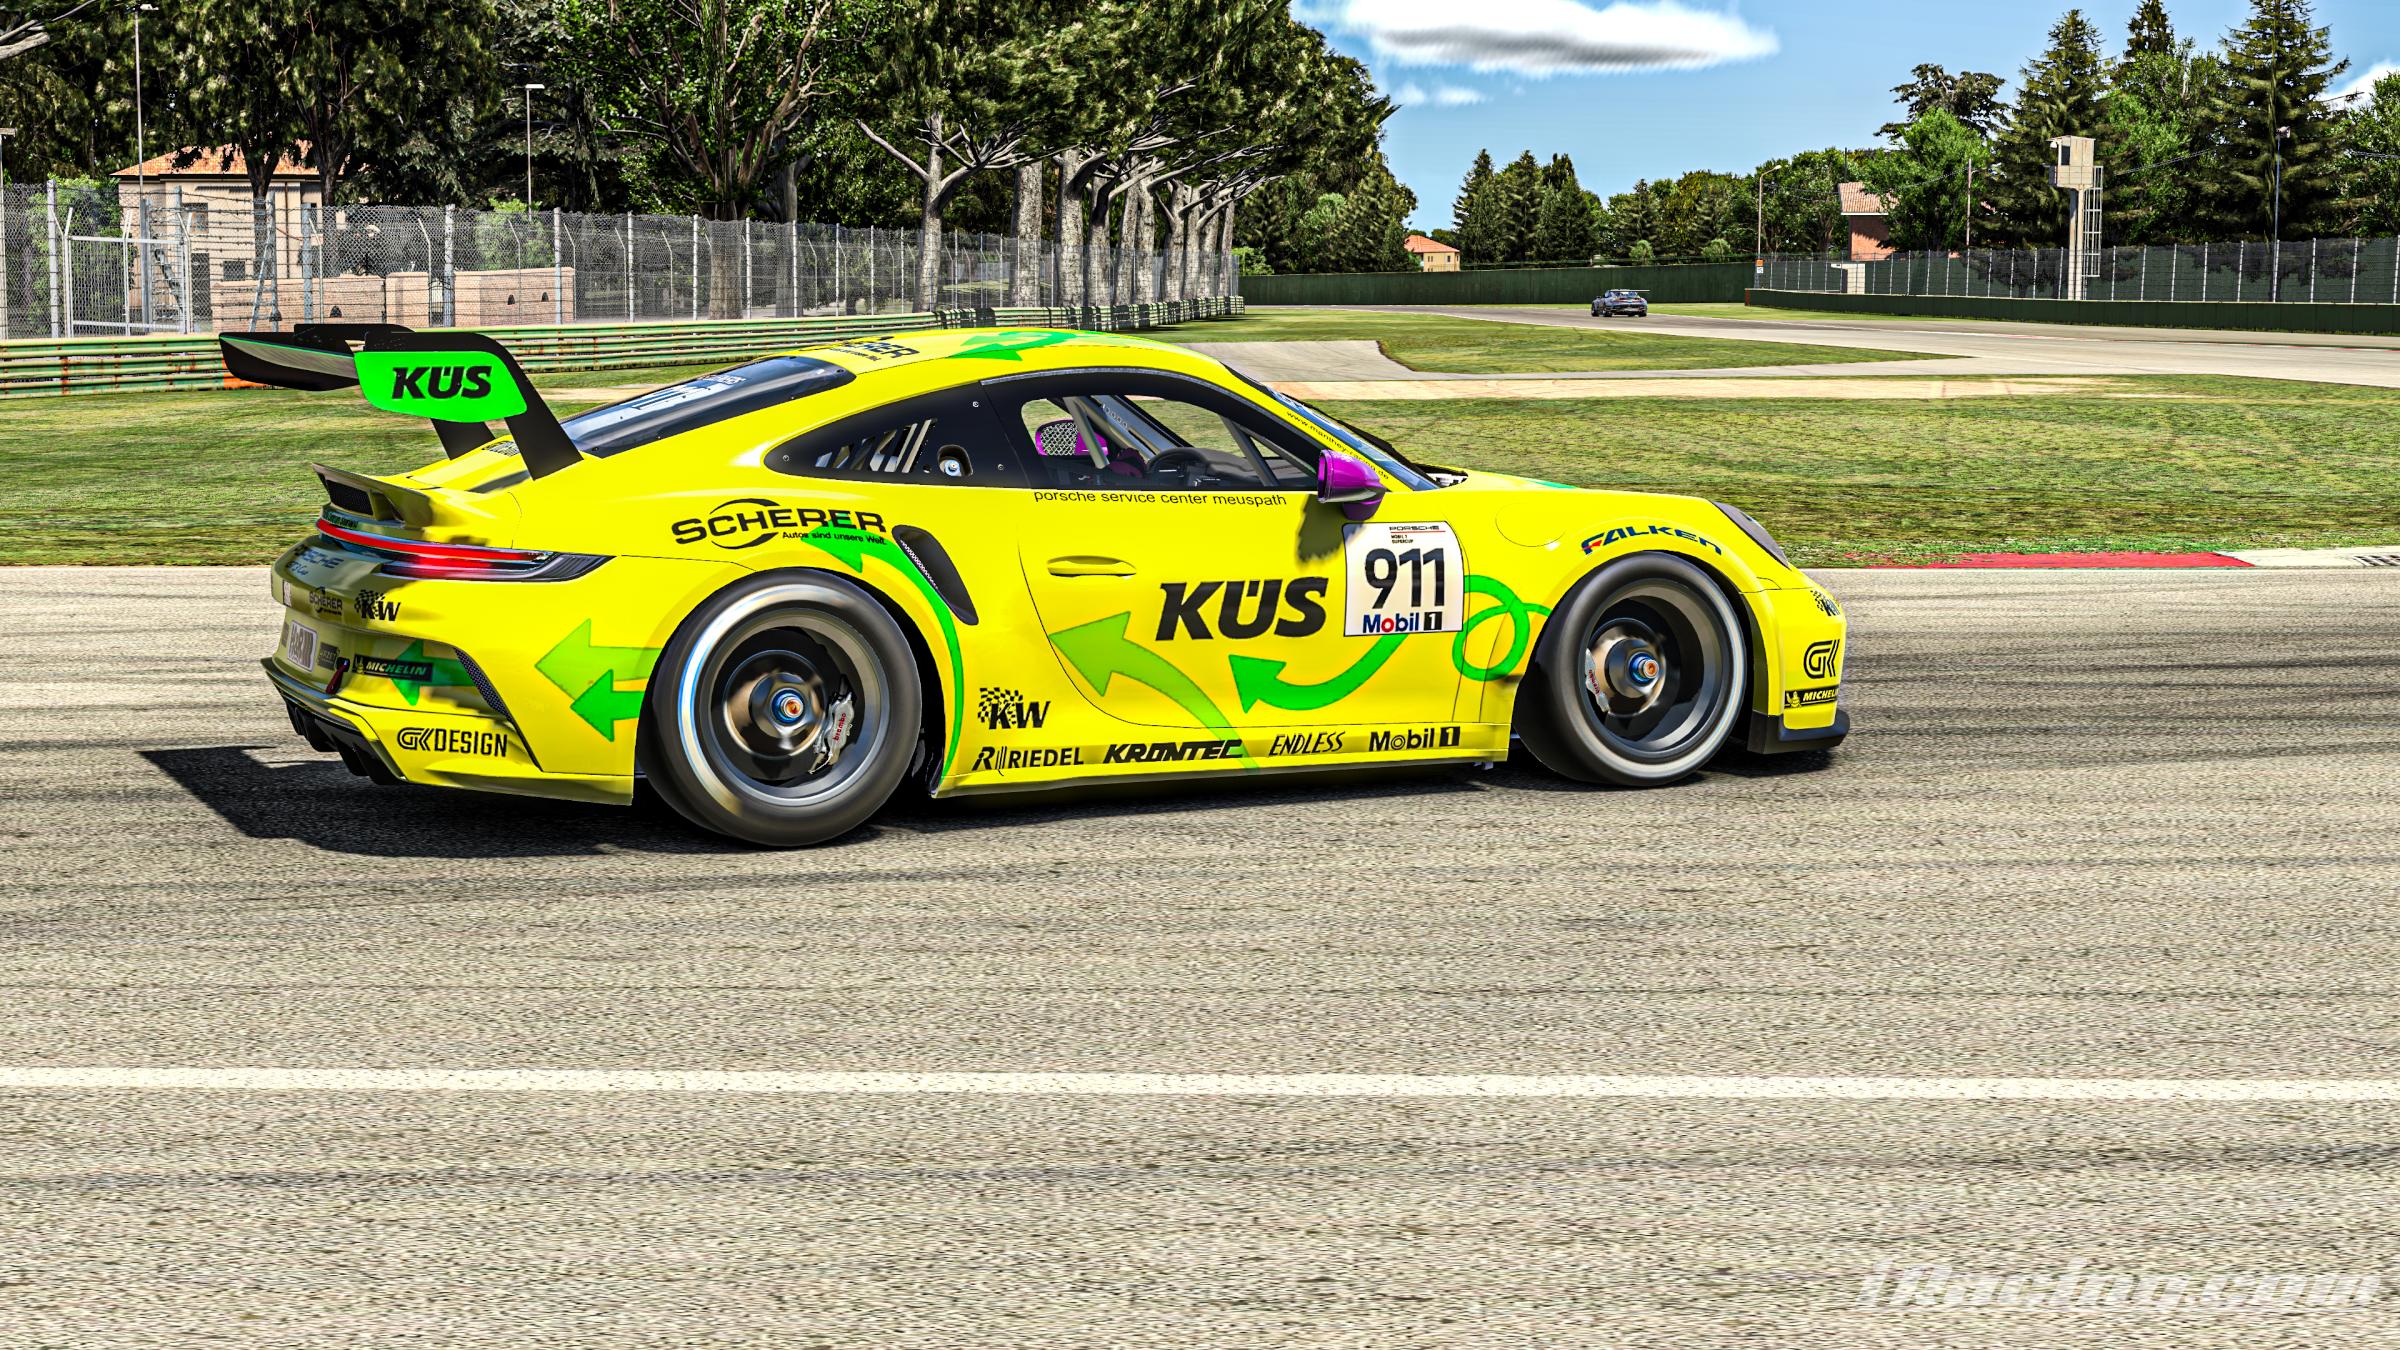 Preview of Manthey Racing Concept Livery - Porsche 911 GT3 Cup by Gino Kelleners